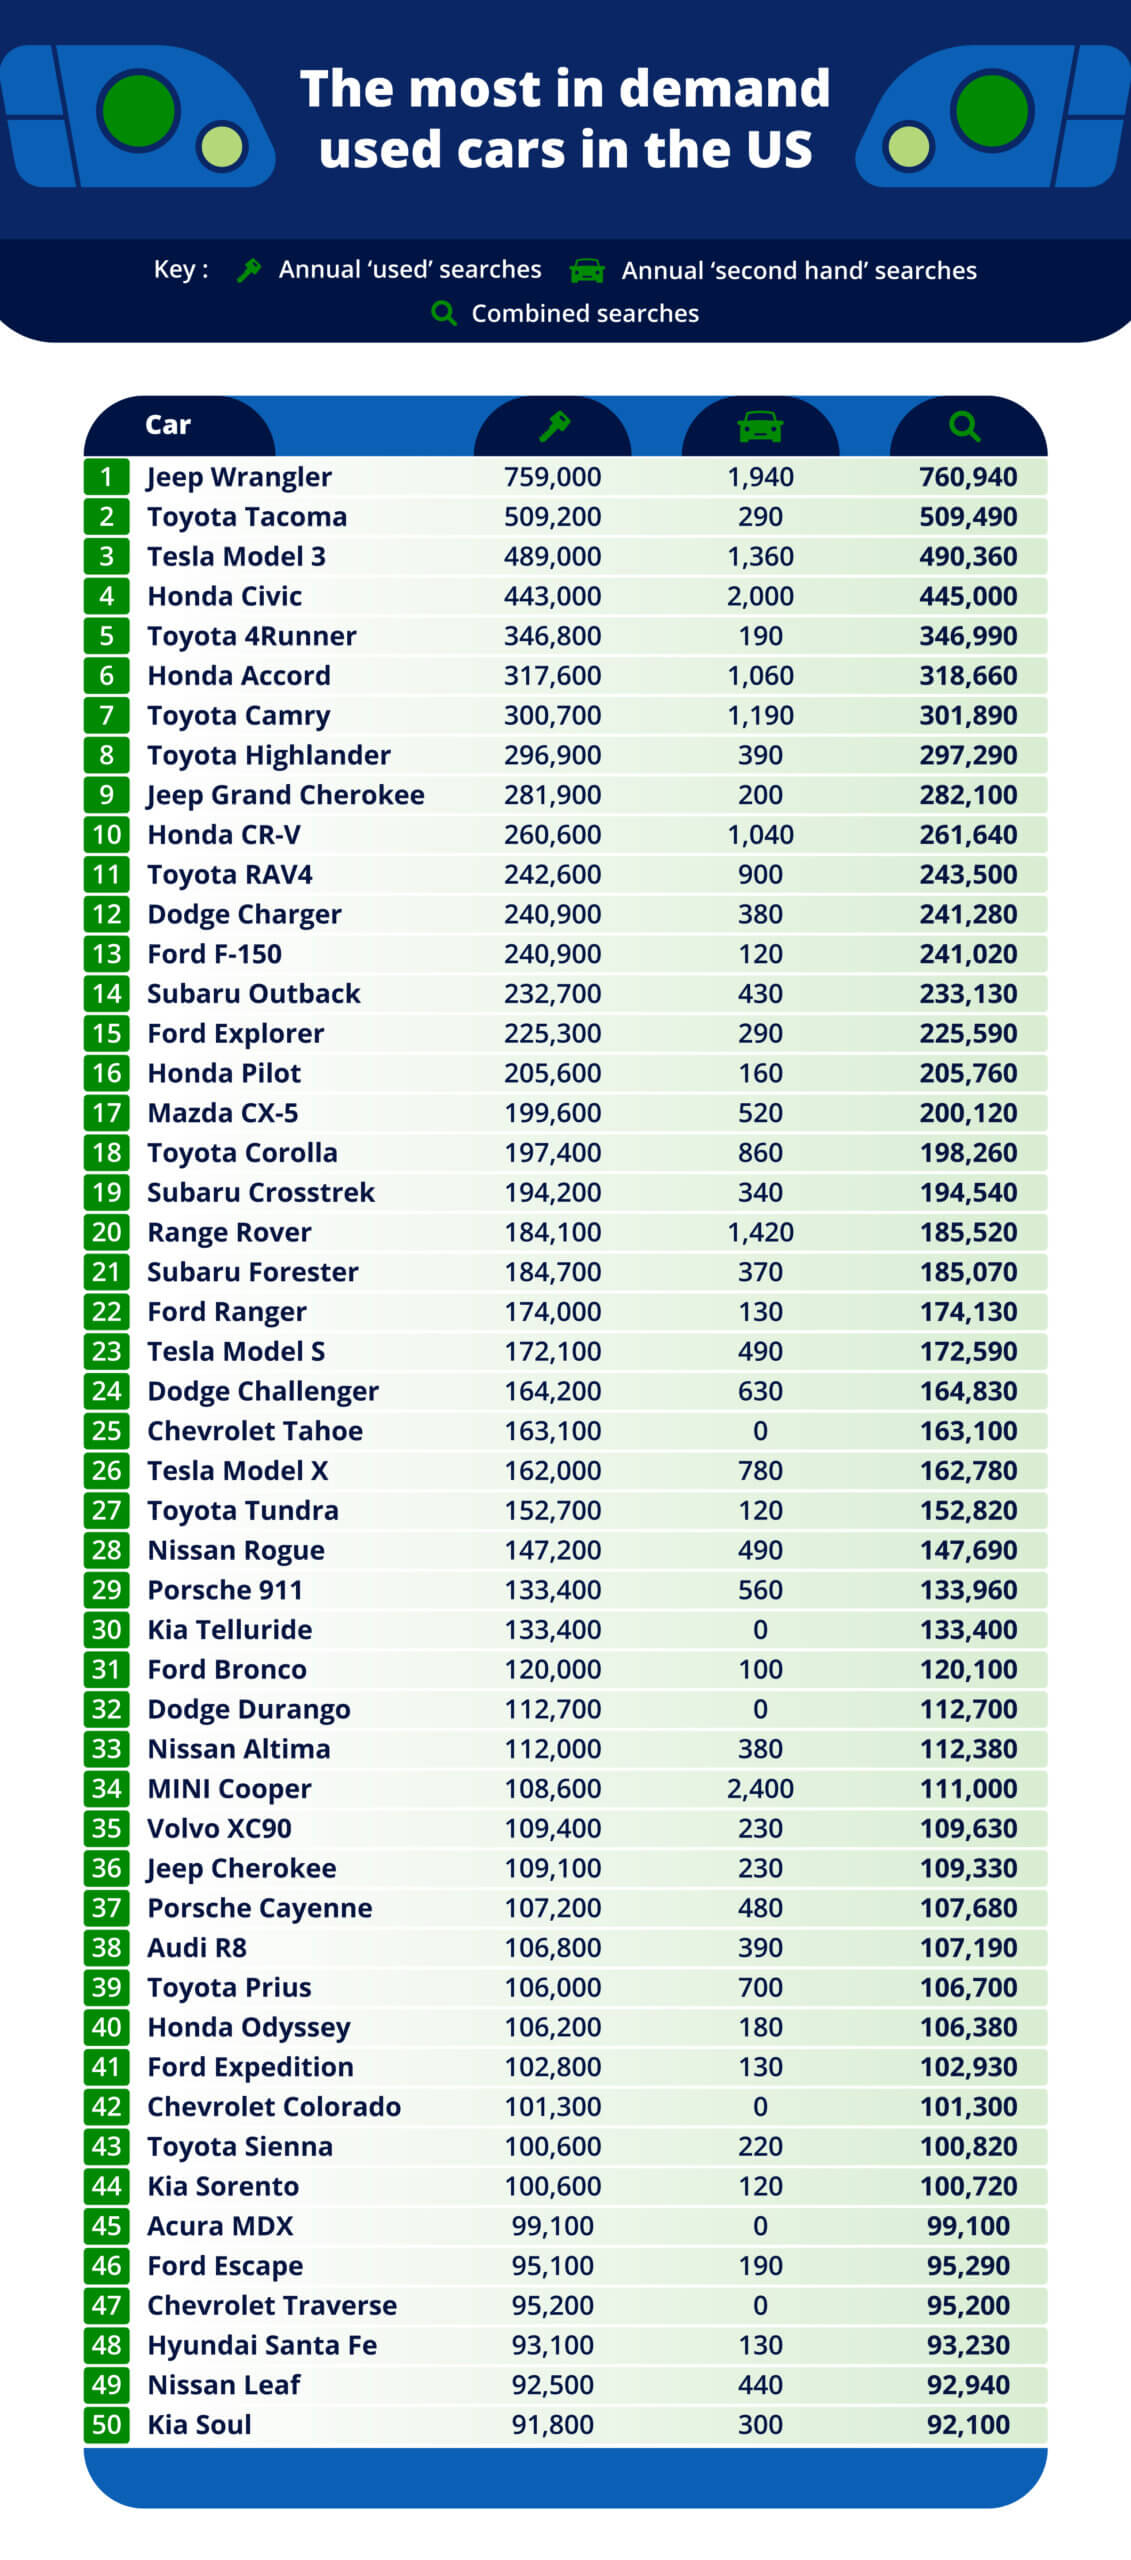 Table showing the top 50 used cars that are the most in demand, based on search volume.